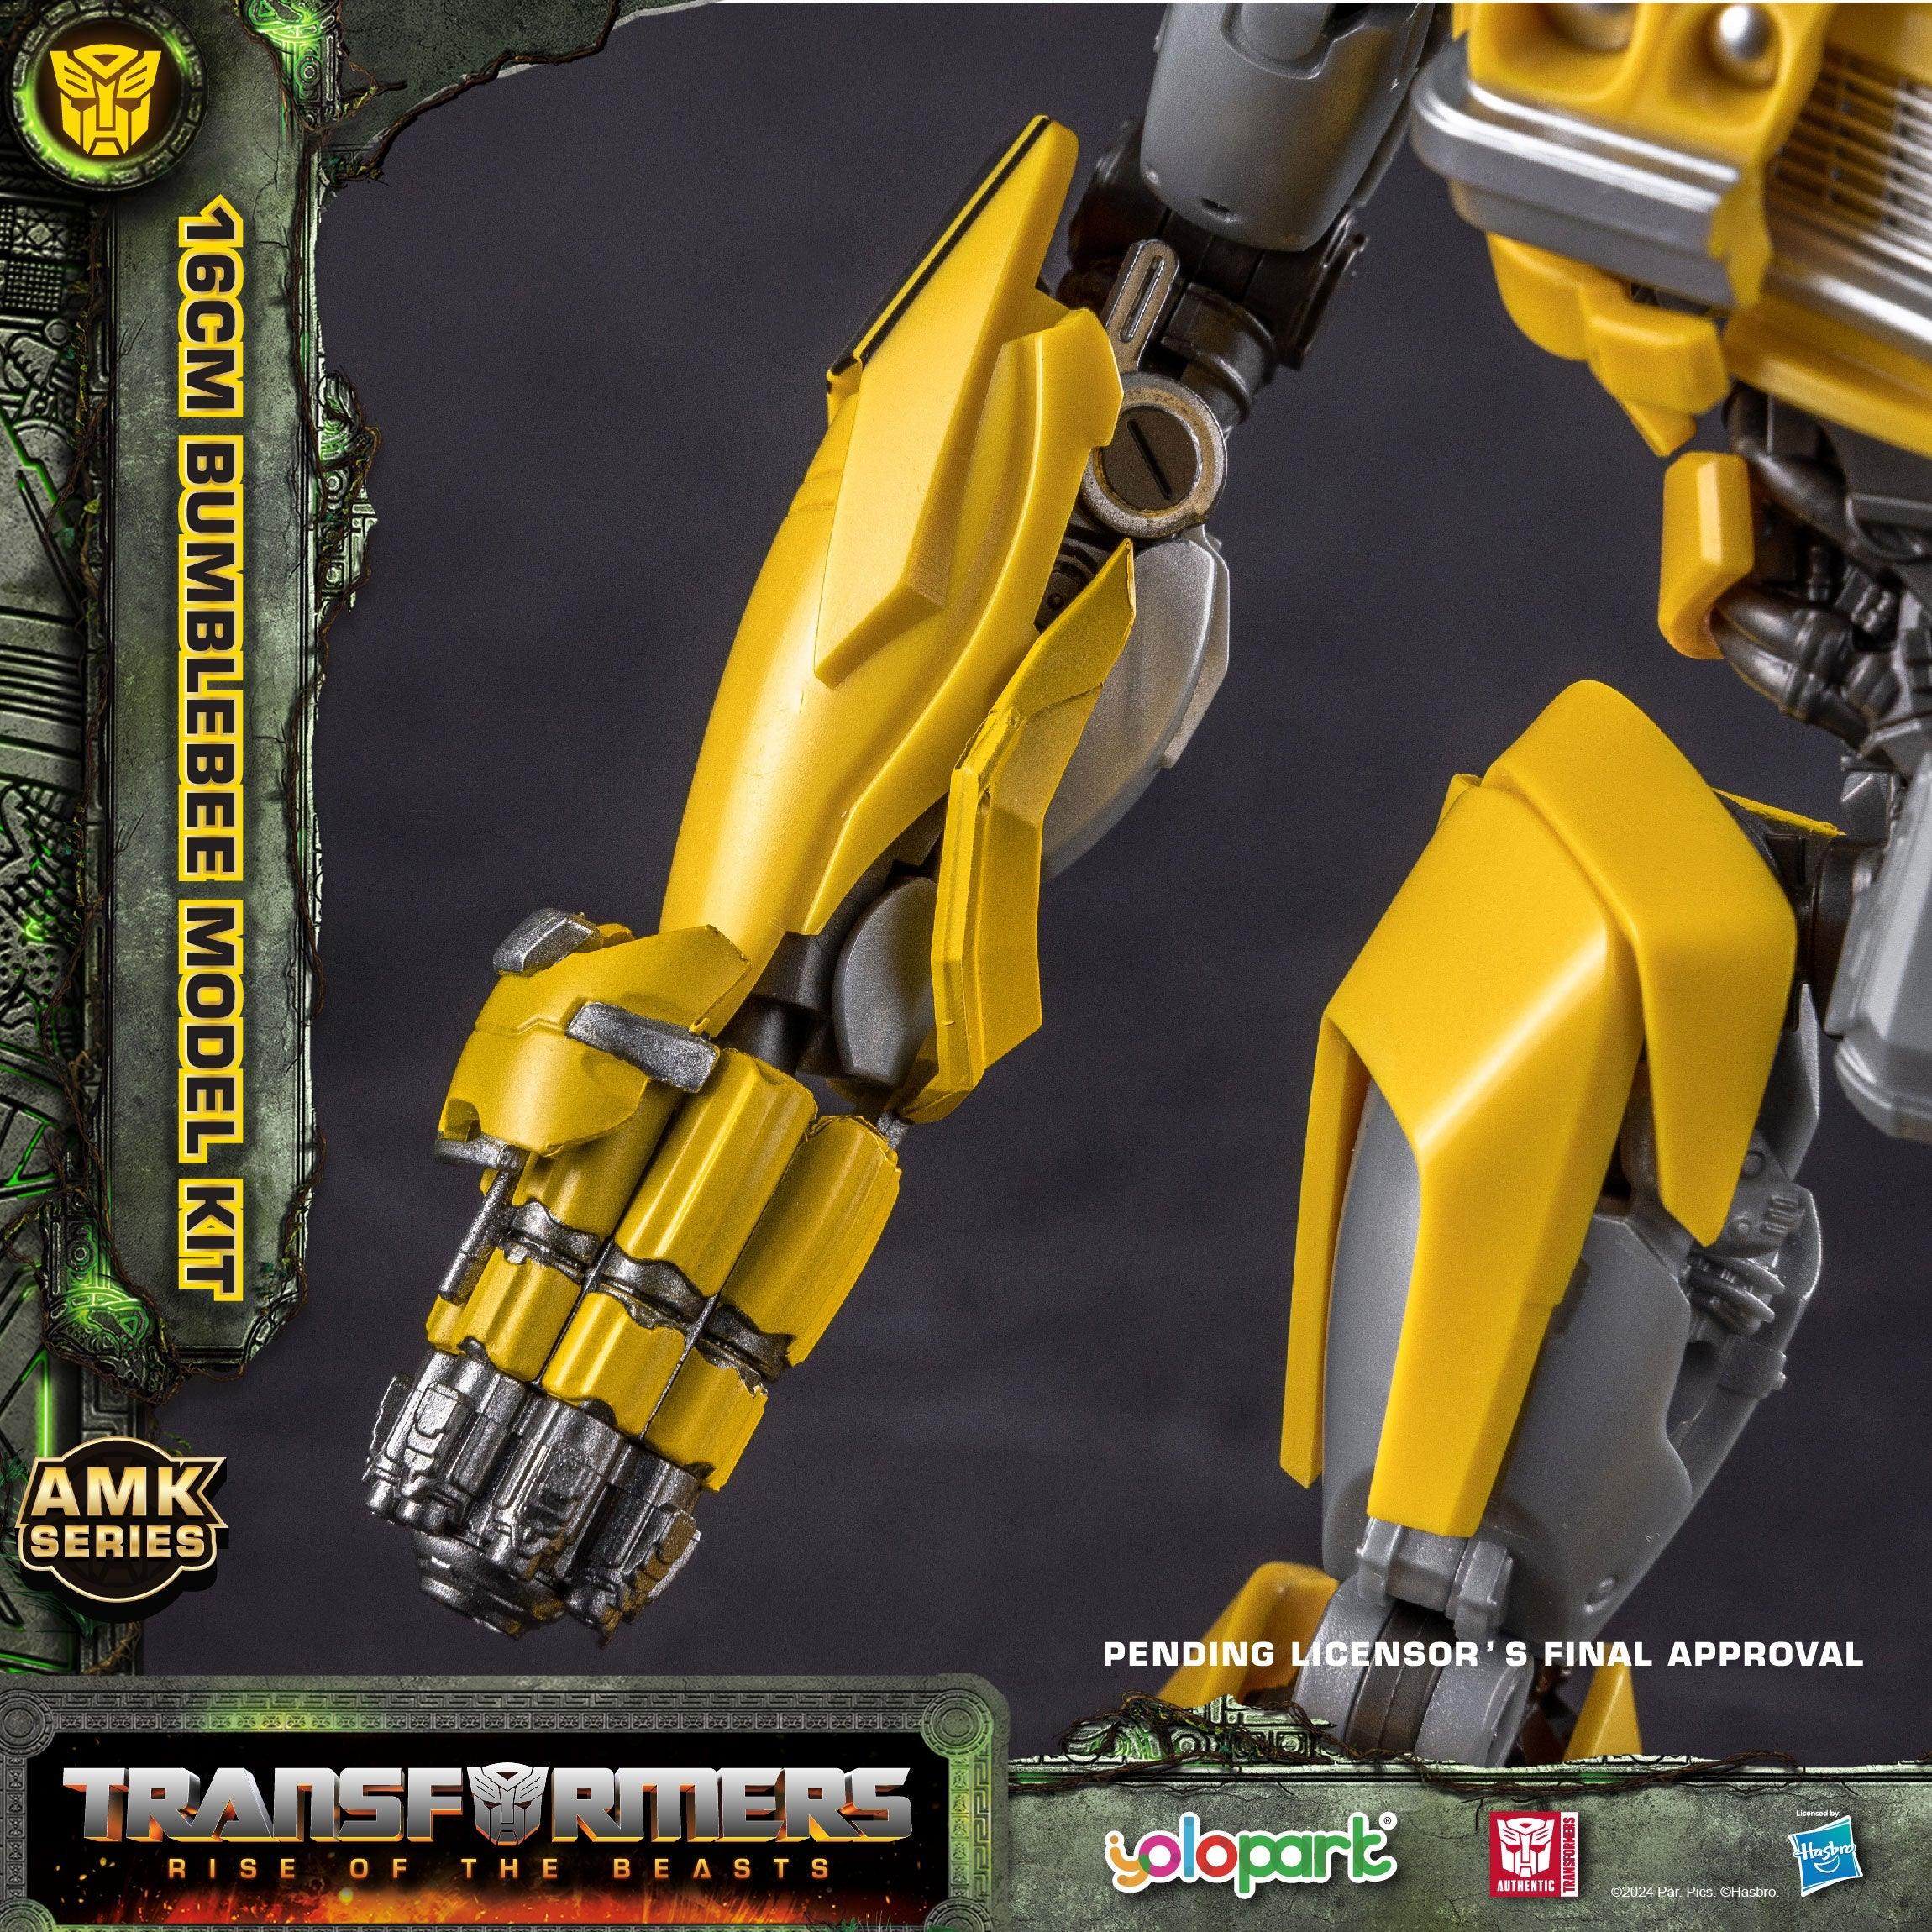 Transformers: Rise of the Beasts - 16cm Bumblebee Model Kit - AMK Series - Yolopark